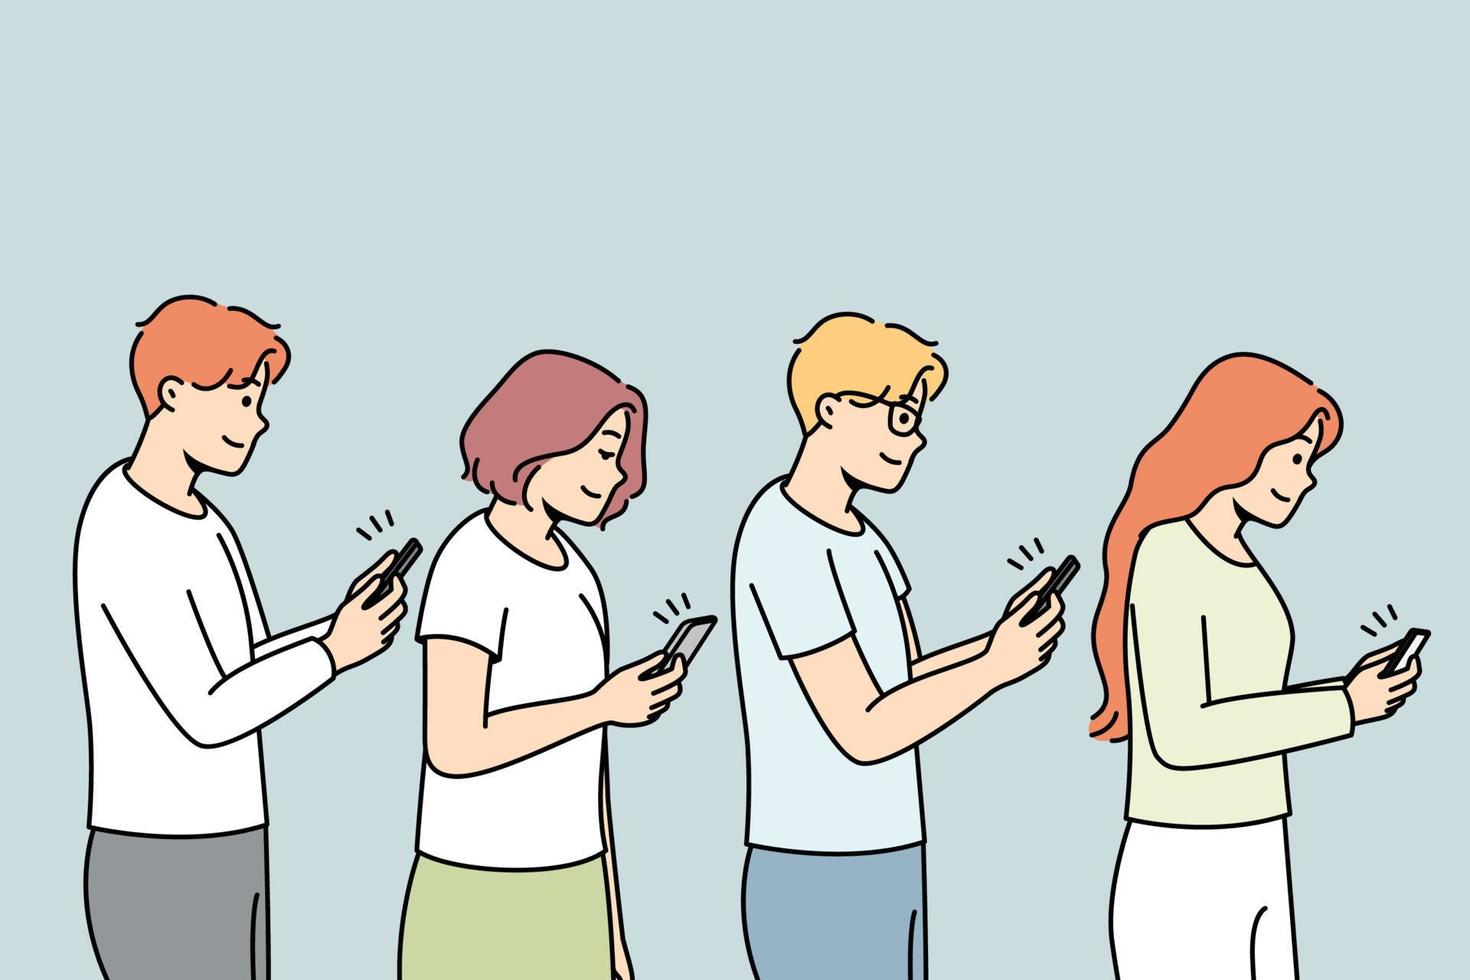 Young people in line with smartphones in hands addicted to gadgets. Men and women with addiction to cellphones. Technology and modern world. Vector illustration.